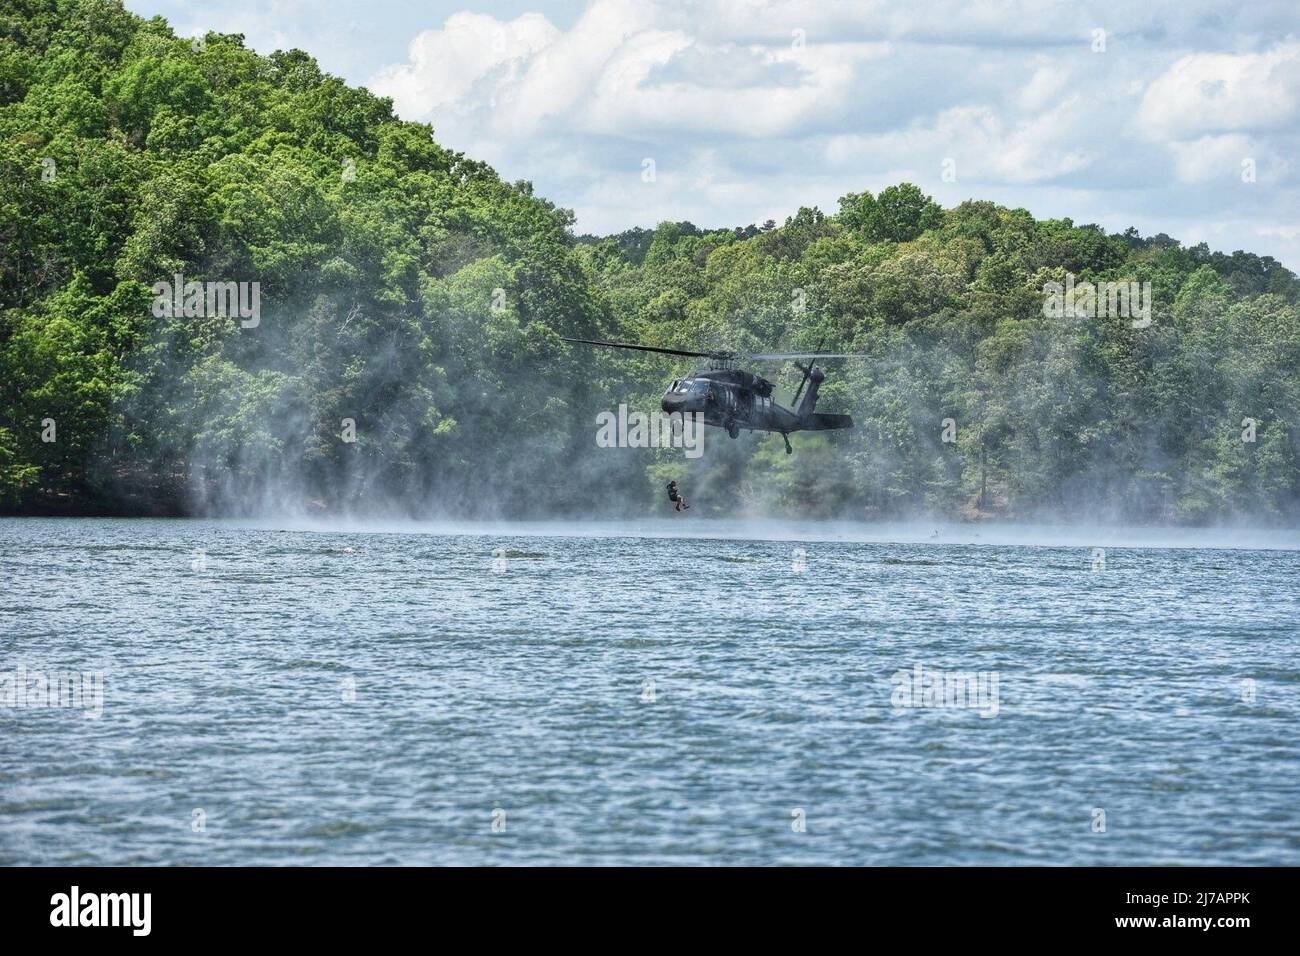 A Soldier from the 5th Ranger Training Battalion jumps from a UH-60 Black Hawk helicopter into Lake Lanier, Georgia, May 3, 2022. Helocasting is an insertion technique developed by Airborne troops whereby Soldiers step off the aircraft's ramp at a low altitude and low speed directly into the water below. (U.S. Army photo by Christopher Carranza) Stock Photo